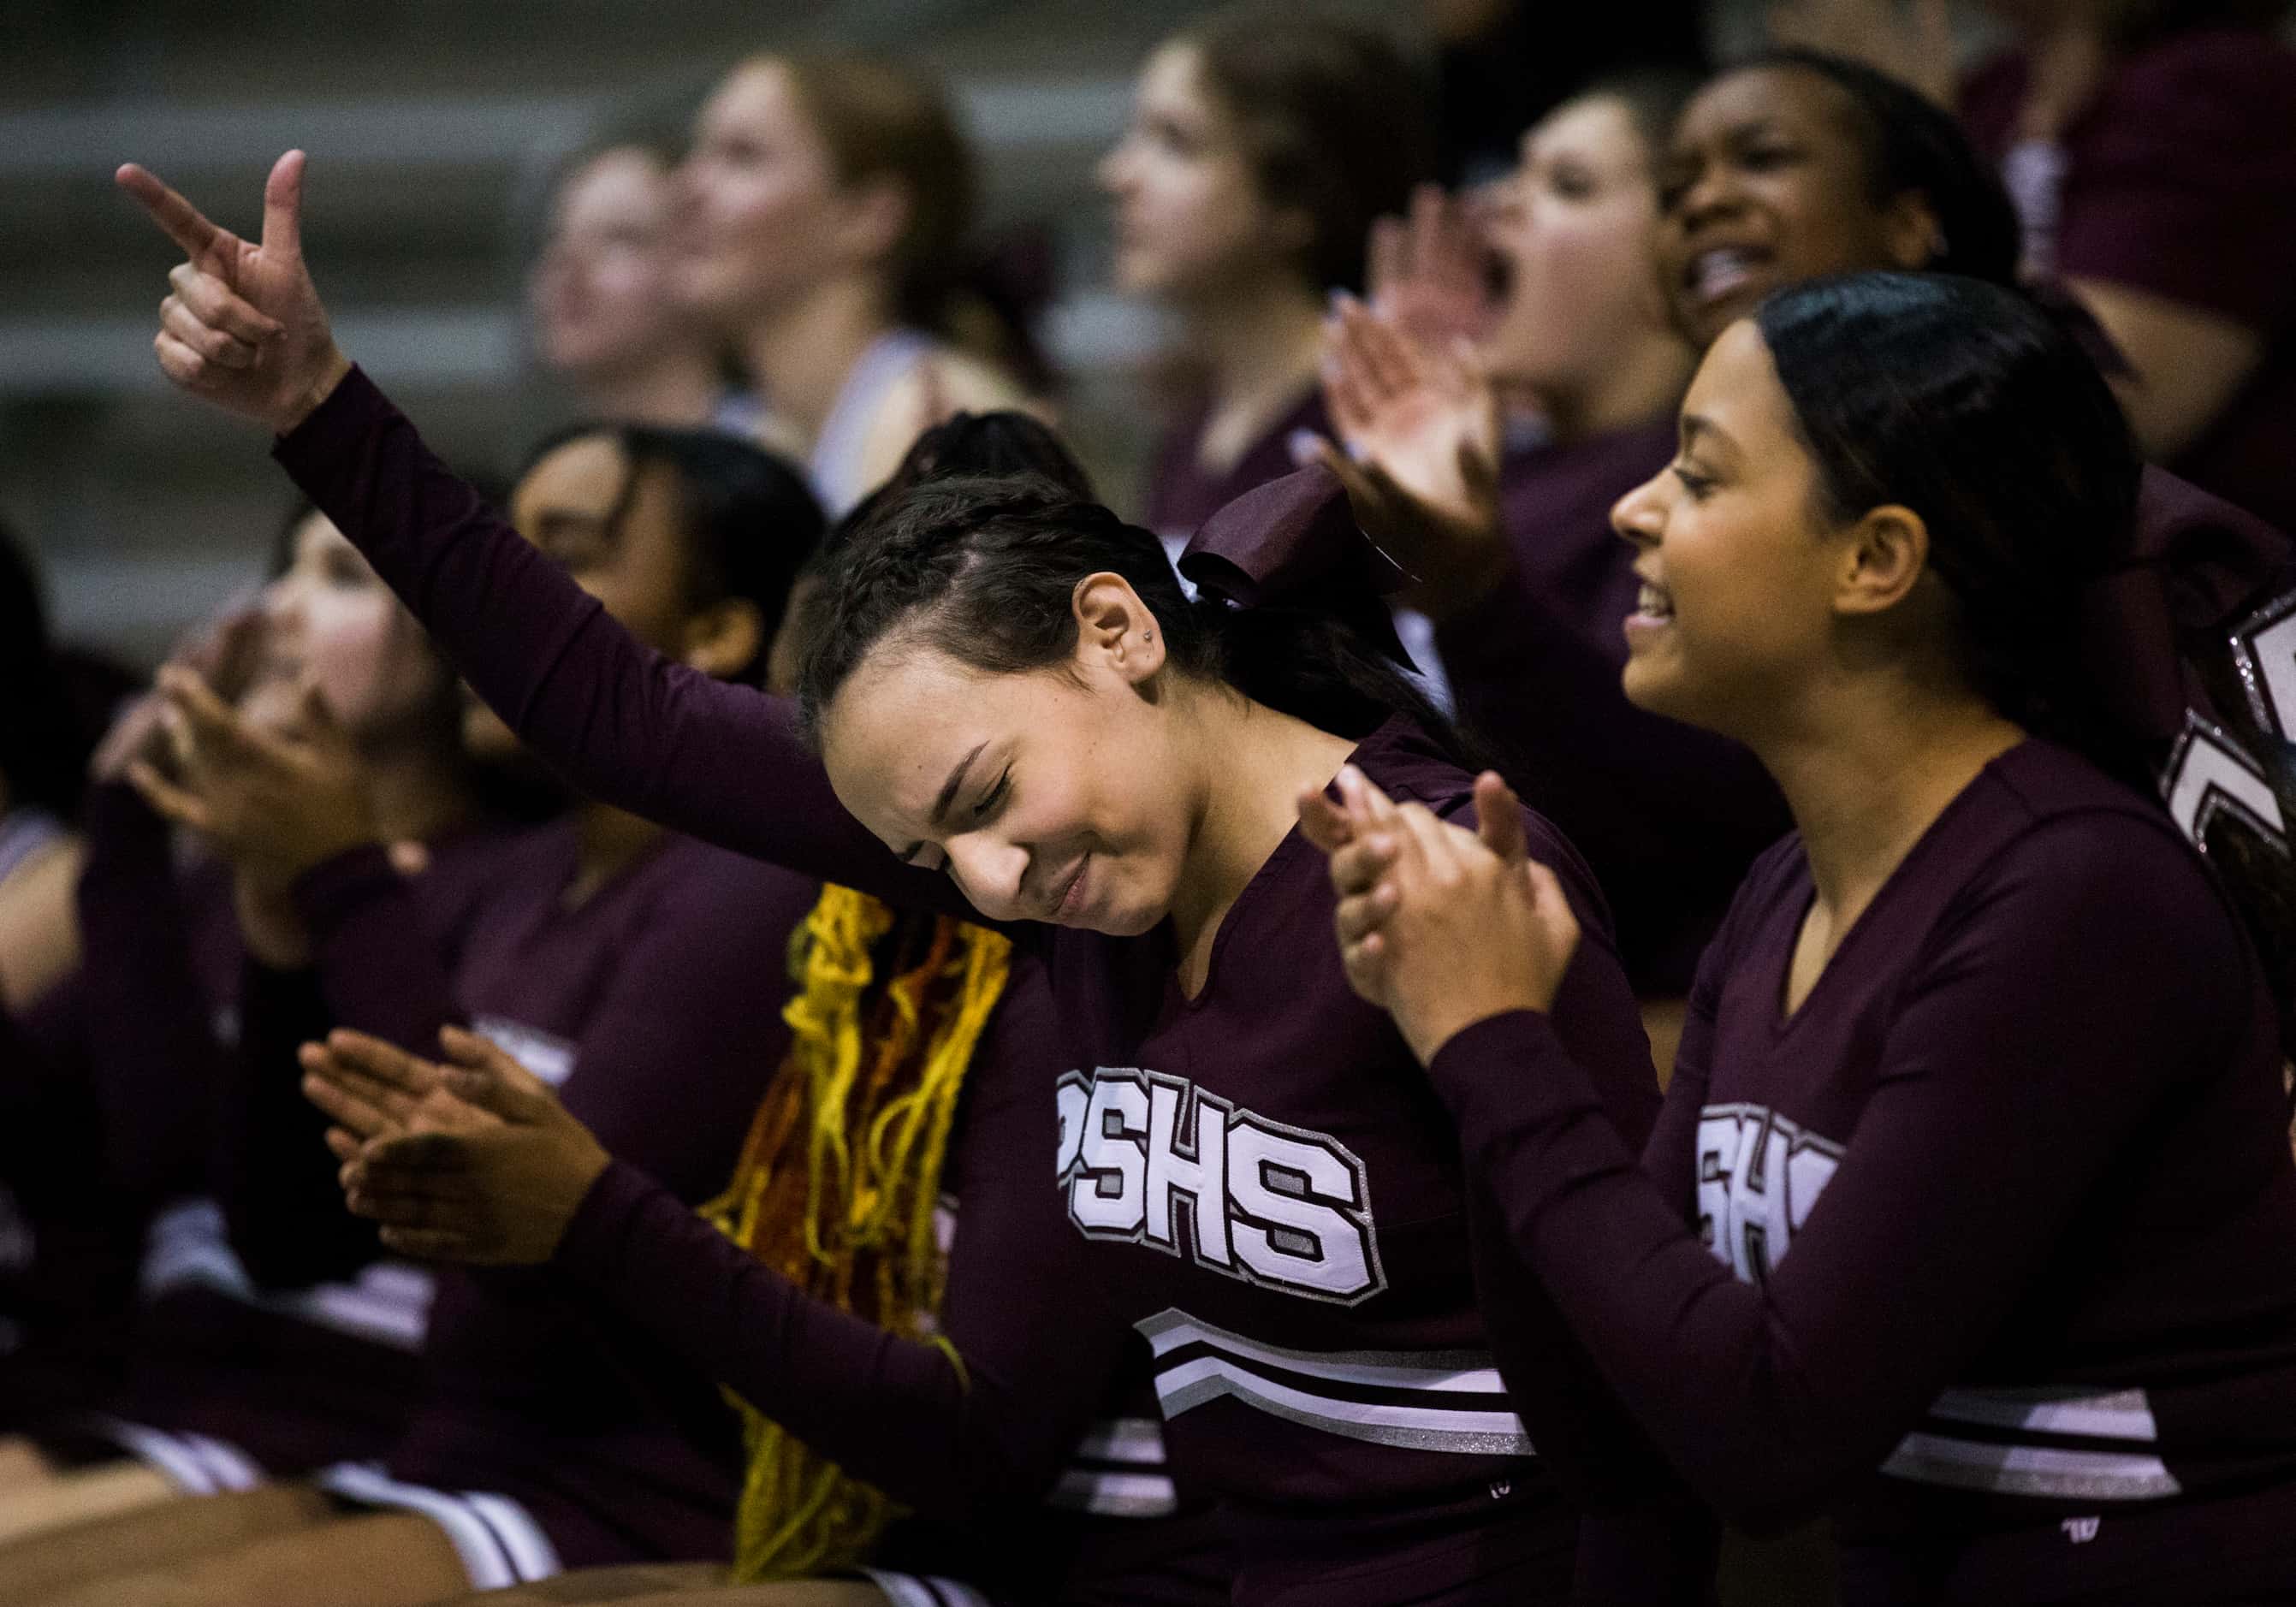 Plano cheerleaders cheer after a point during the fourth quarter of a UIL 6A Region II...